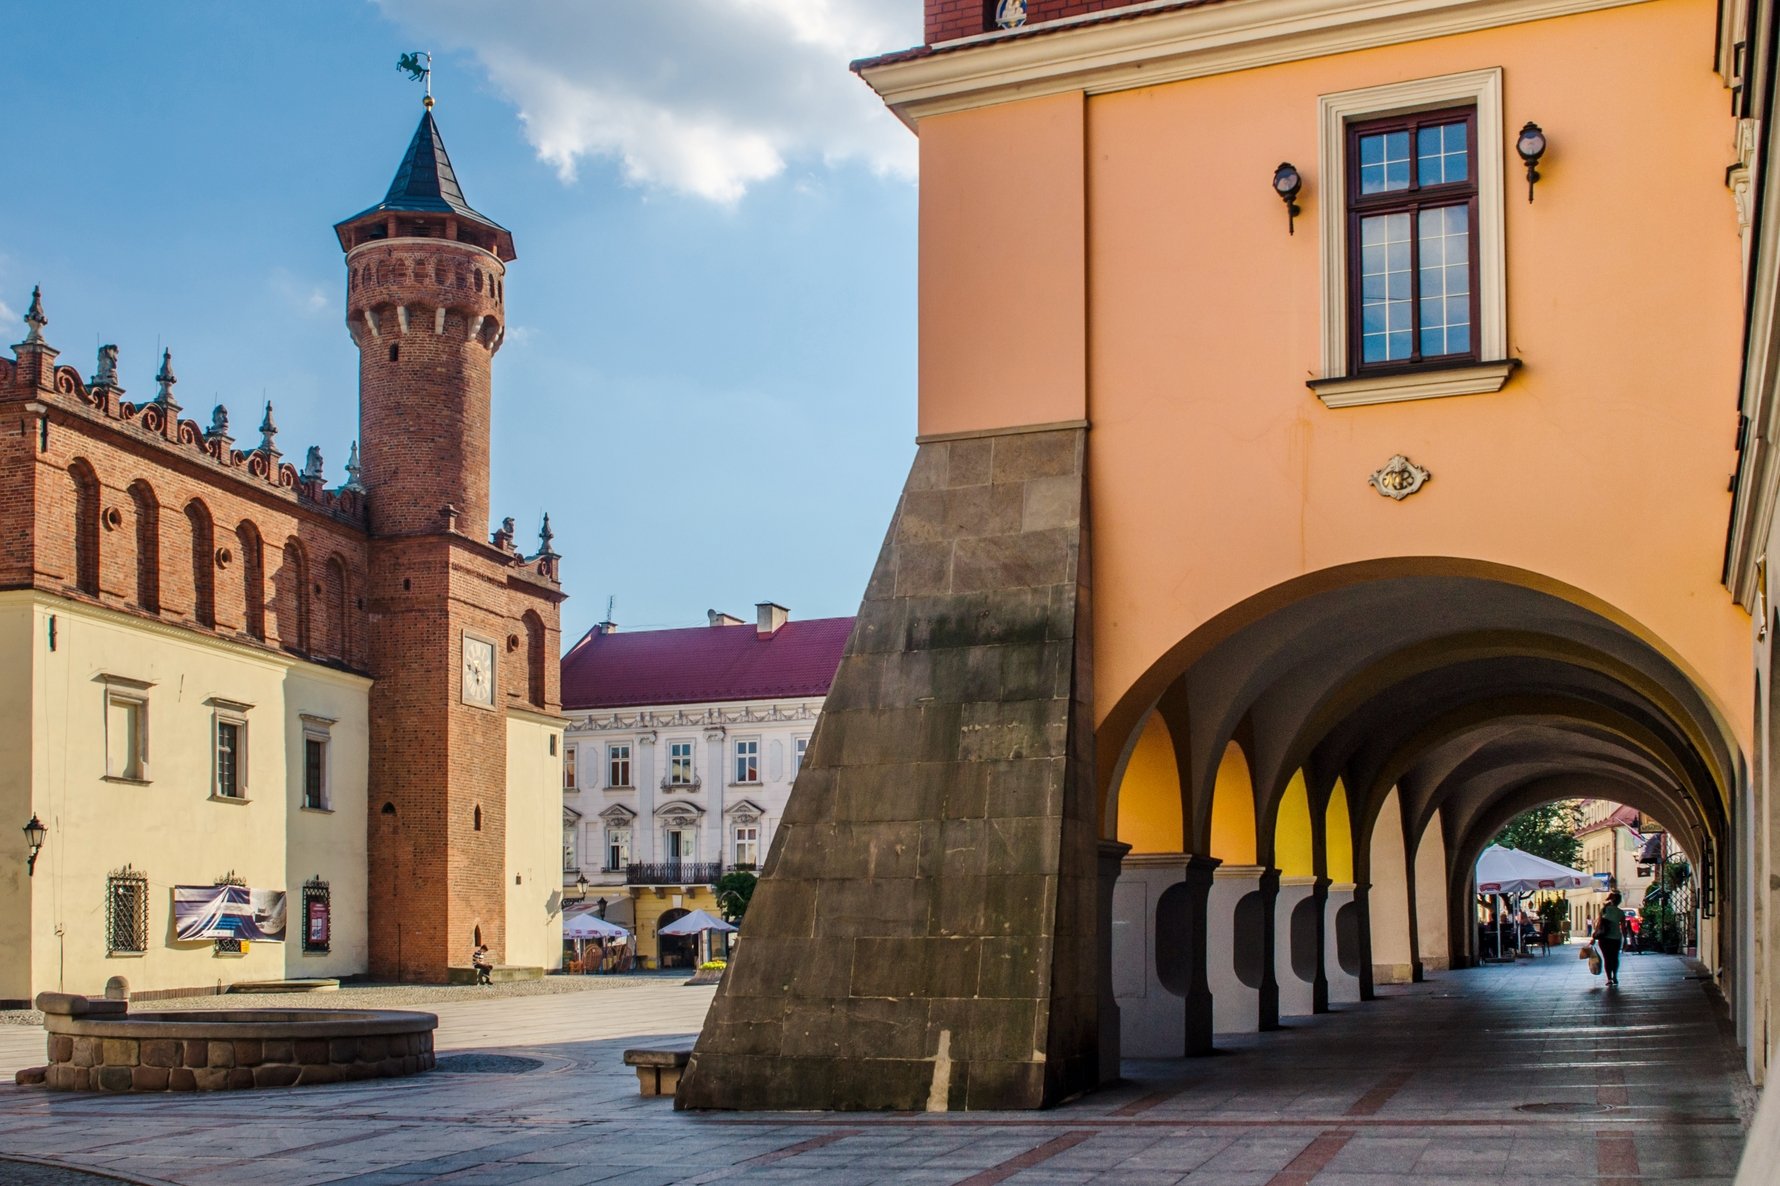 5-reasons-for-visiting-tarn-w-poland-s-pearl-of-the-renaissance